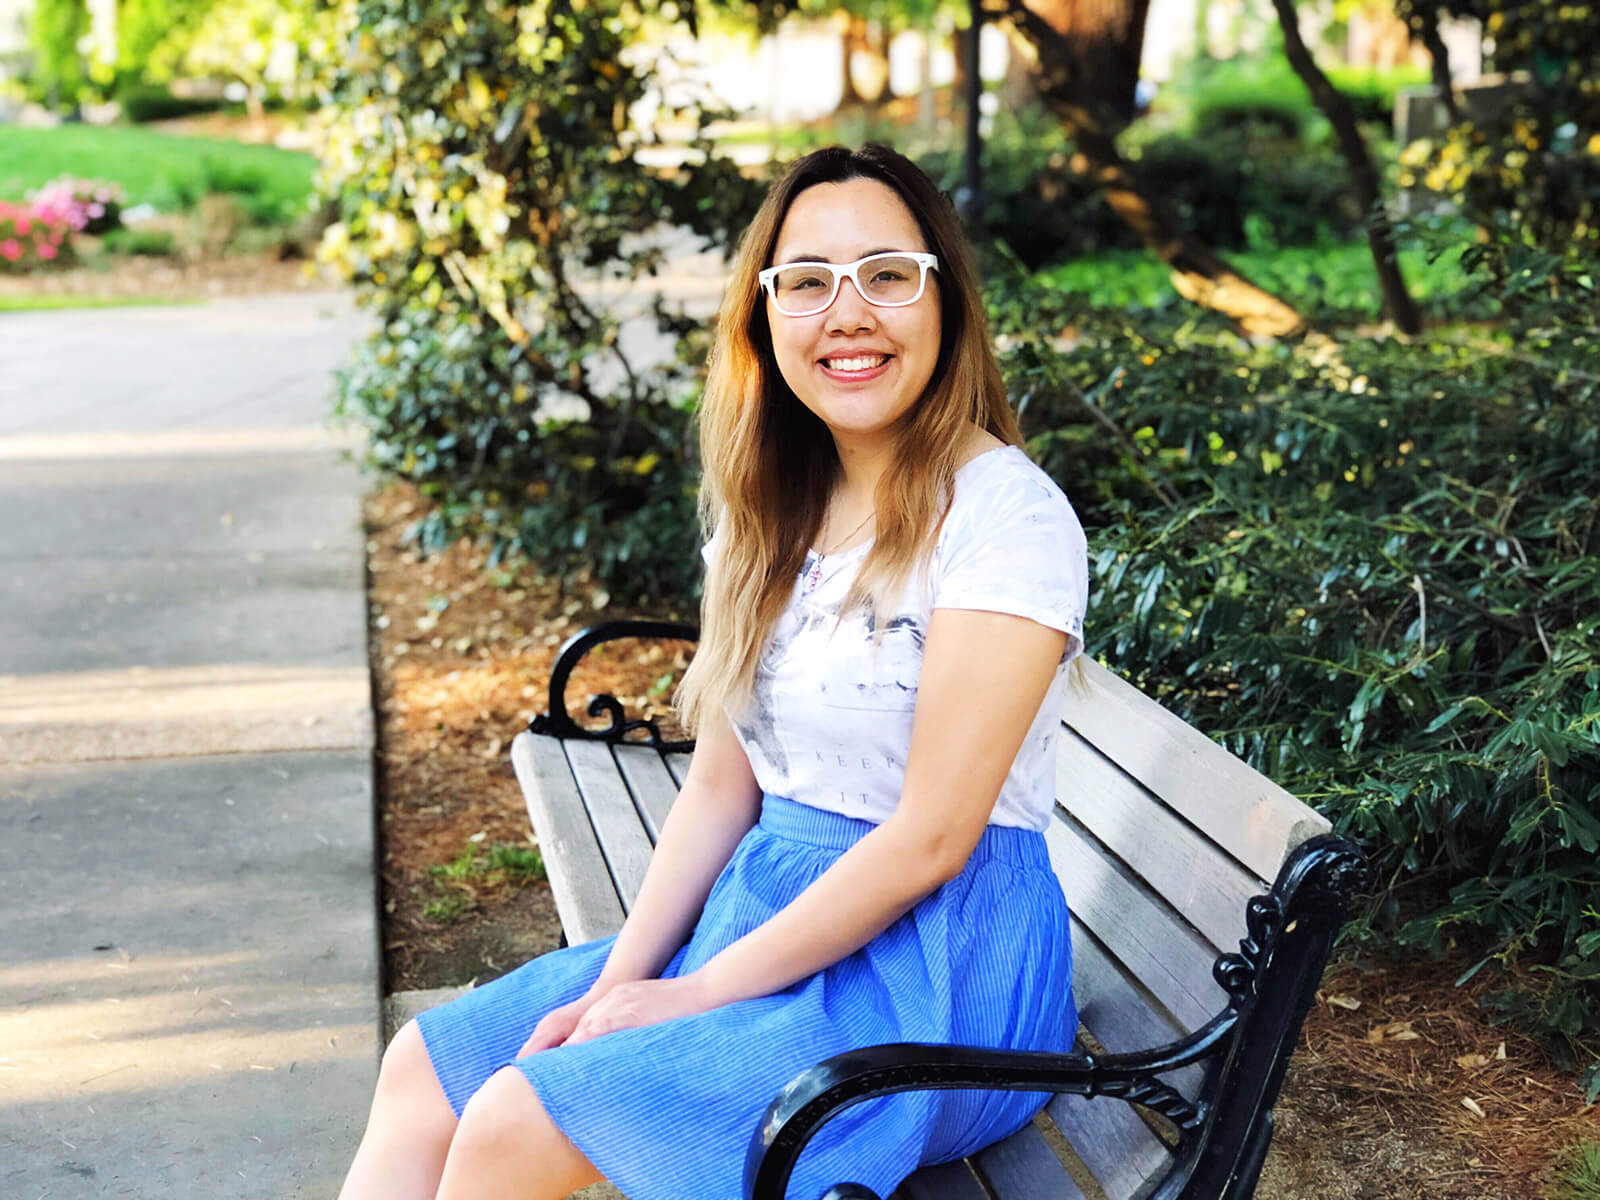 A girl sitting on a park bench, smiling. She has dark hair with blonde highlights, is wearing white glasses, and a light coloured top and a blue skirt.